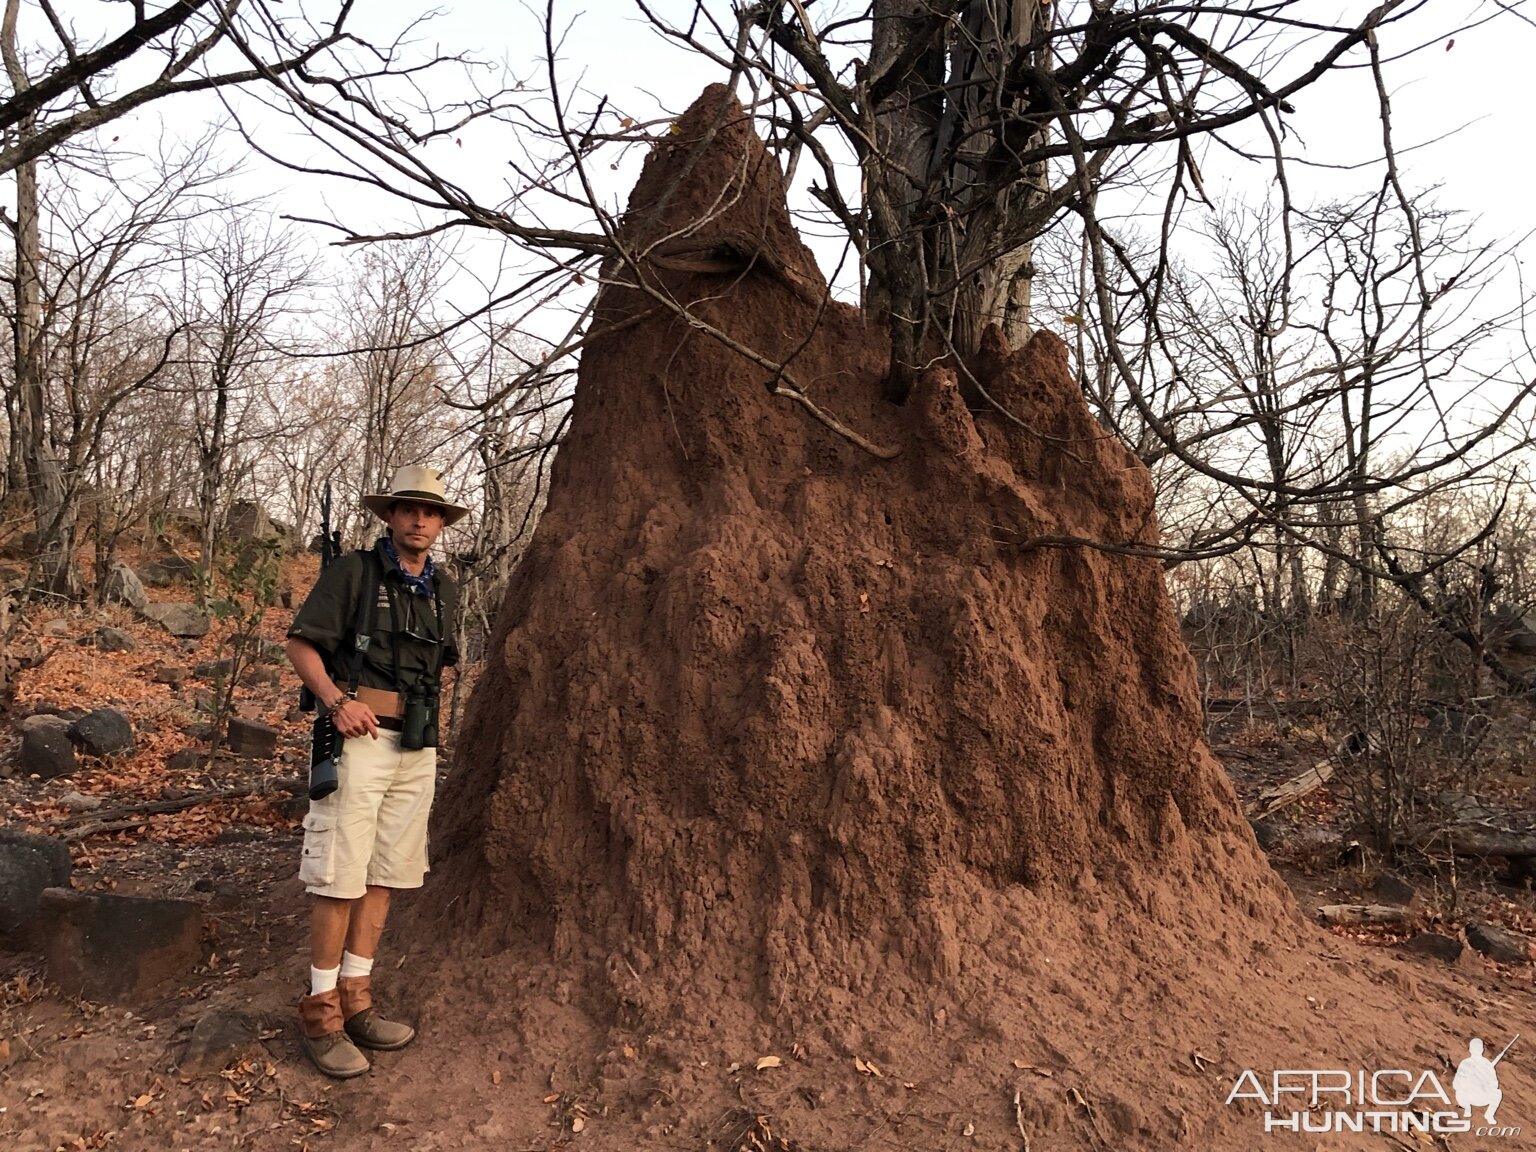 Ant Hill in Zimbabwe